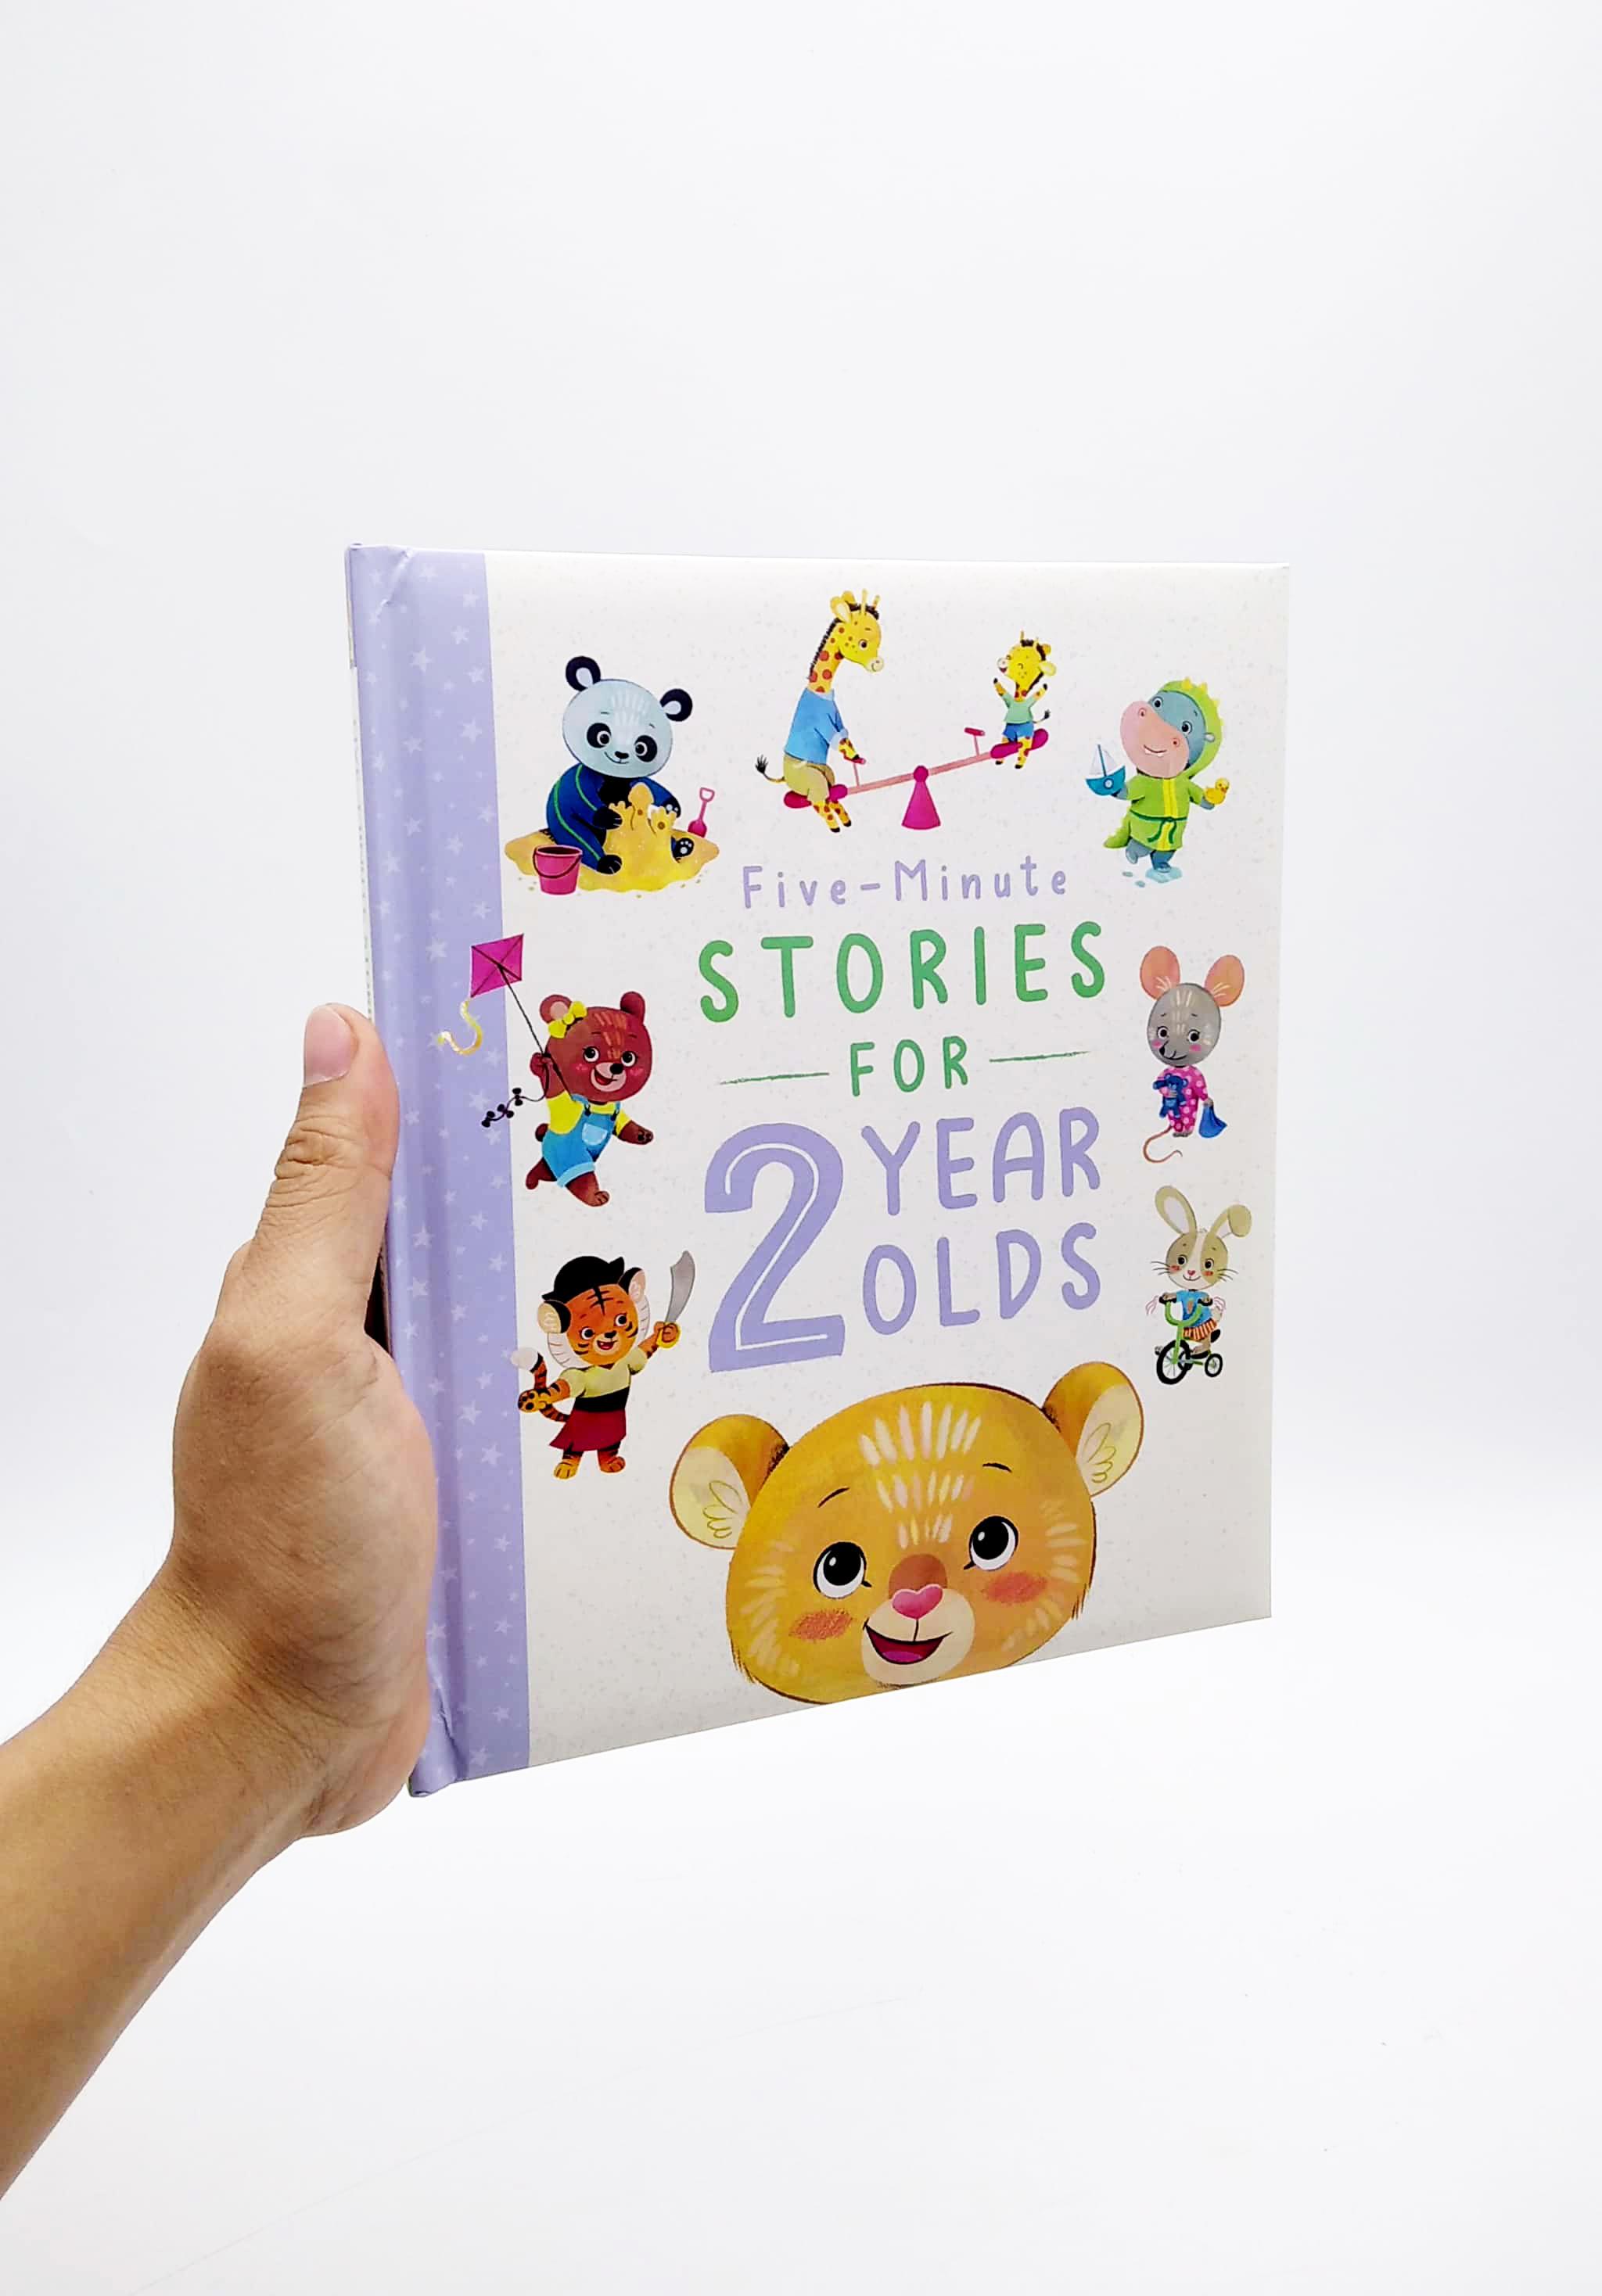 Five-Minute Stories For 2 Year Olds (Bedtime Story Collection)